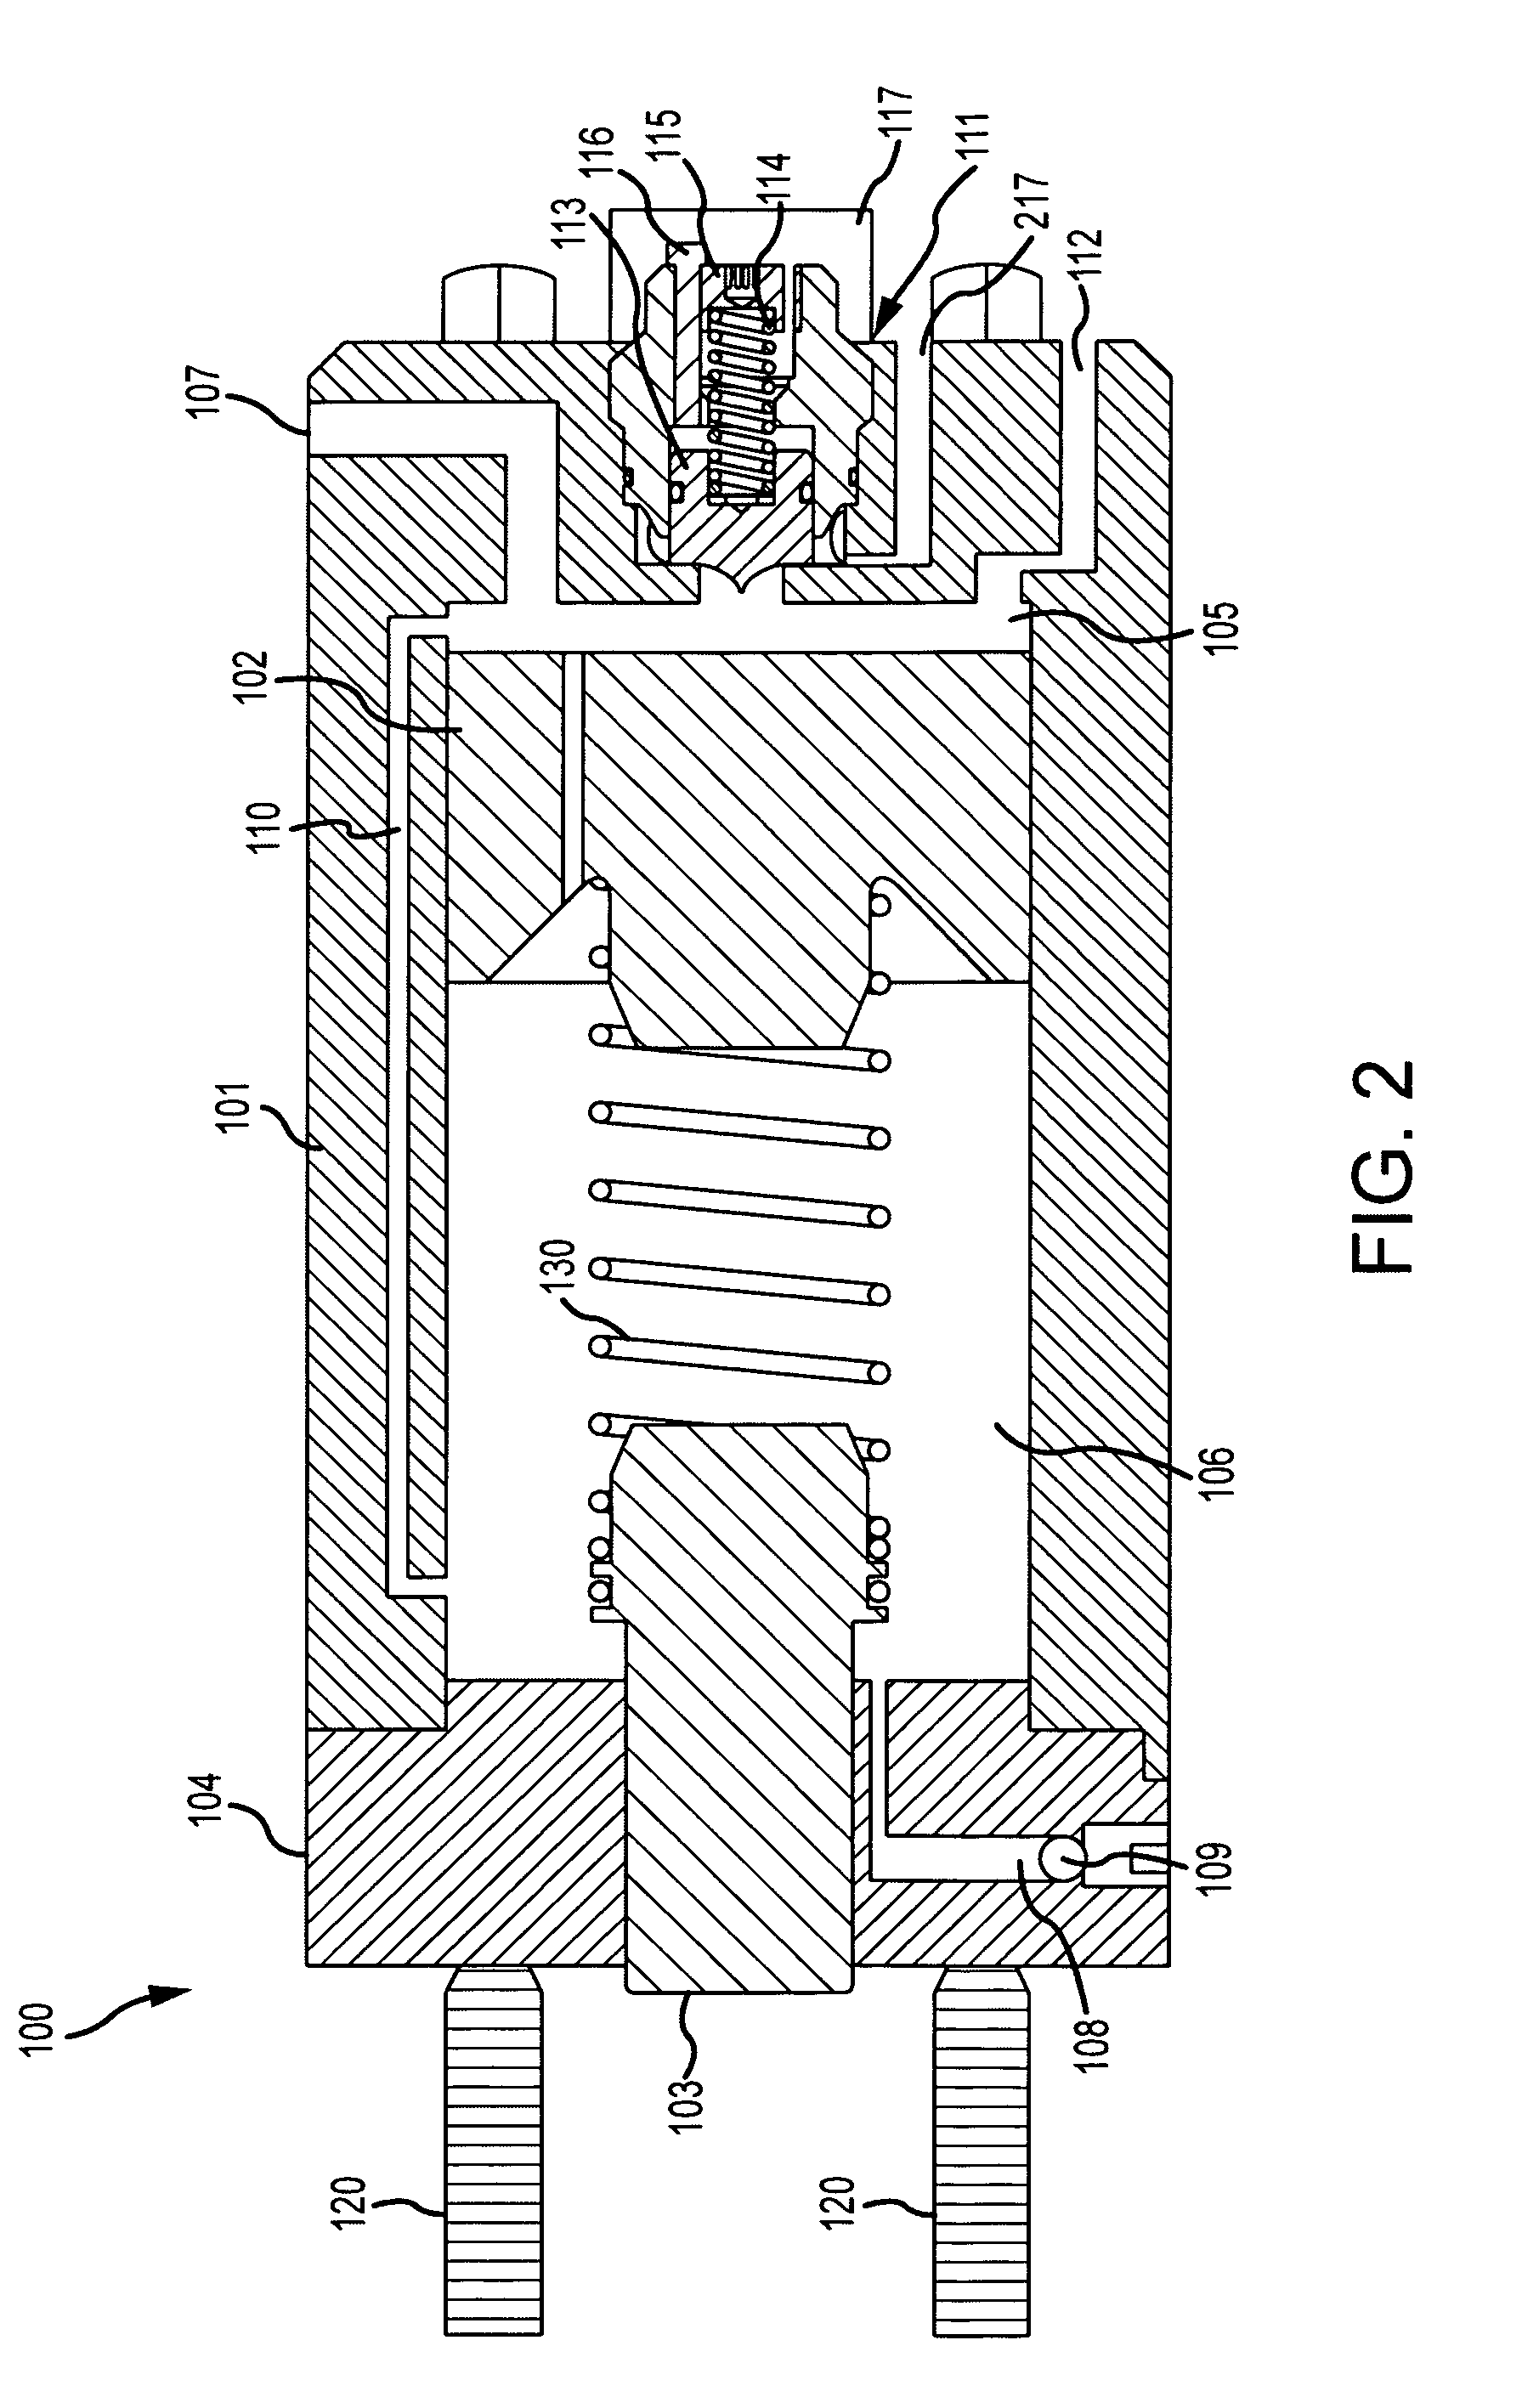 Fluid operated actuator including a bleed port